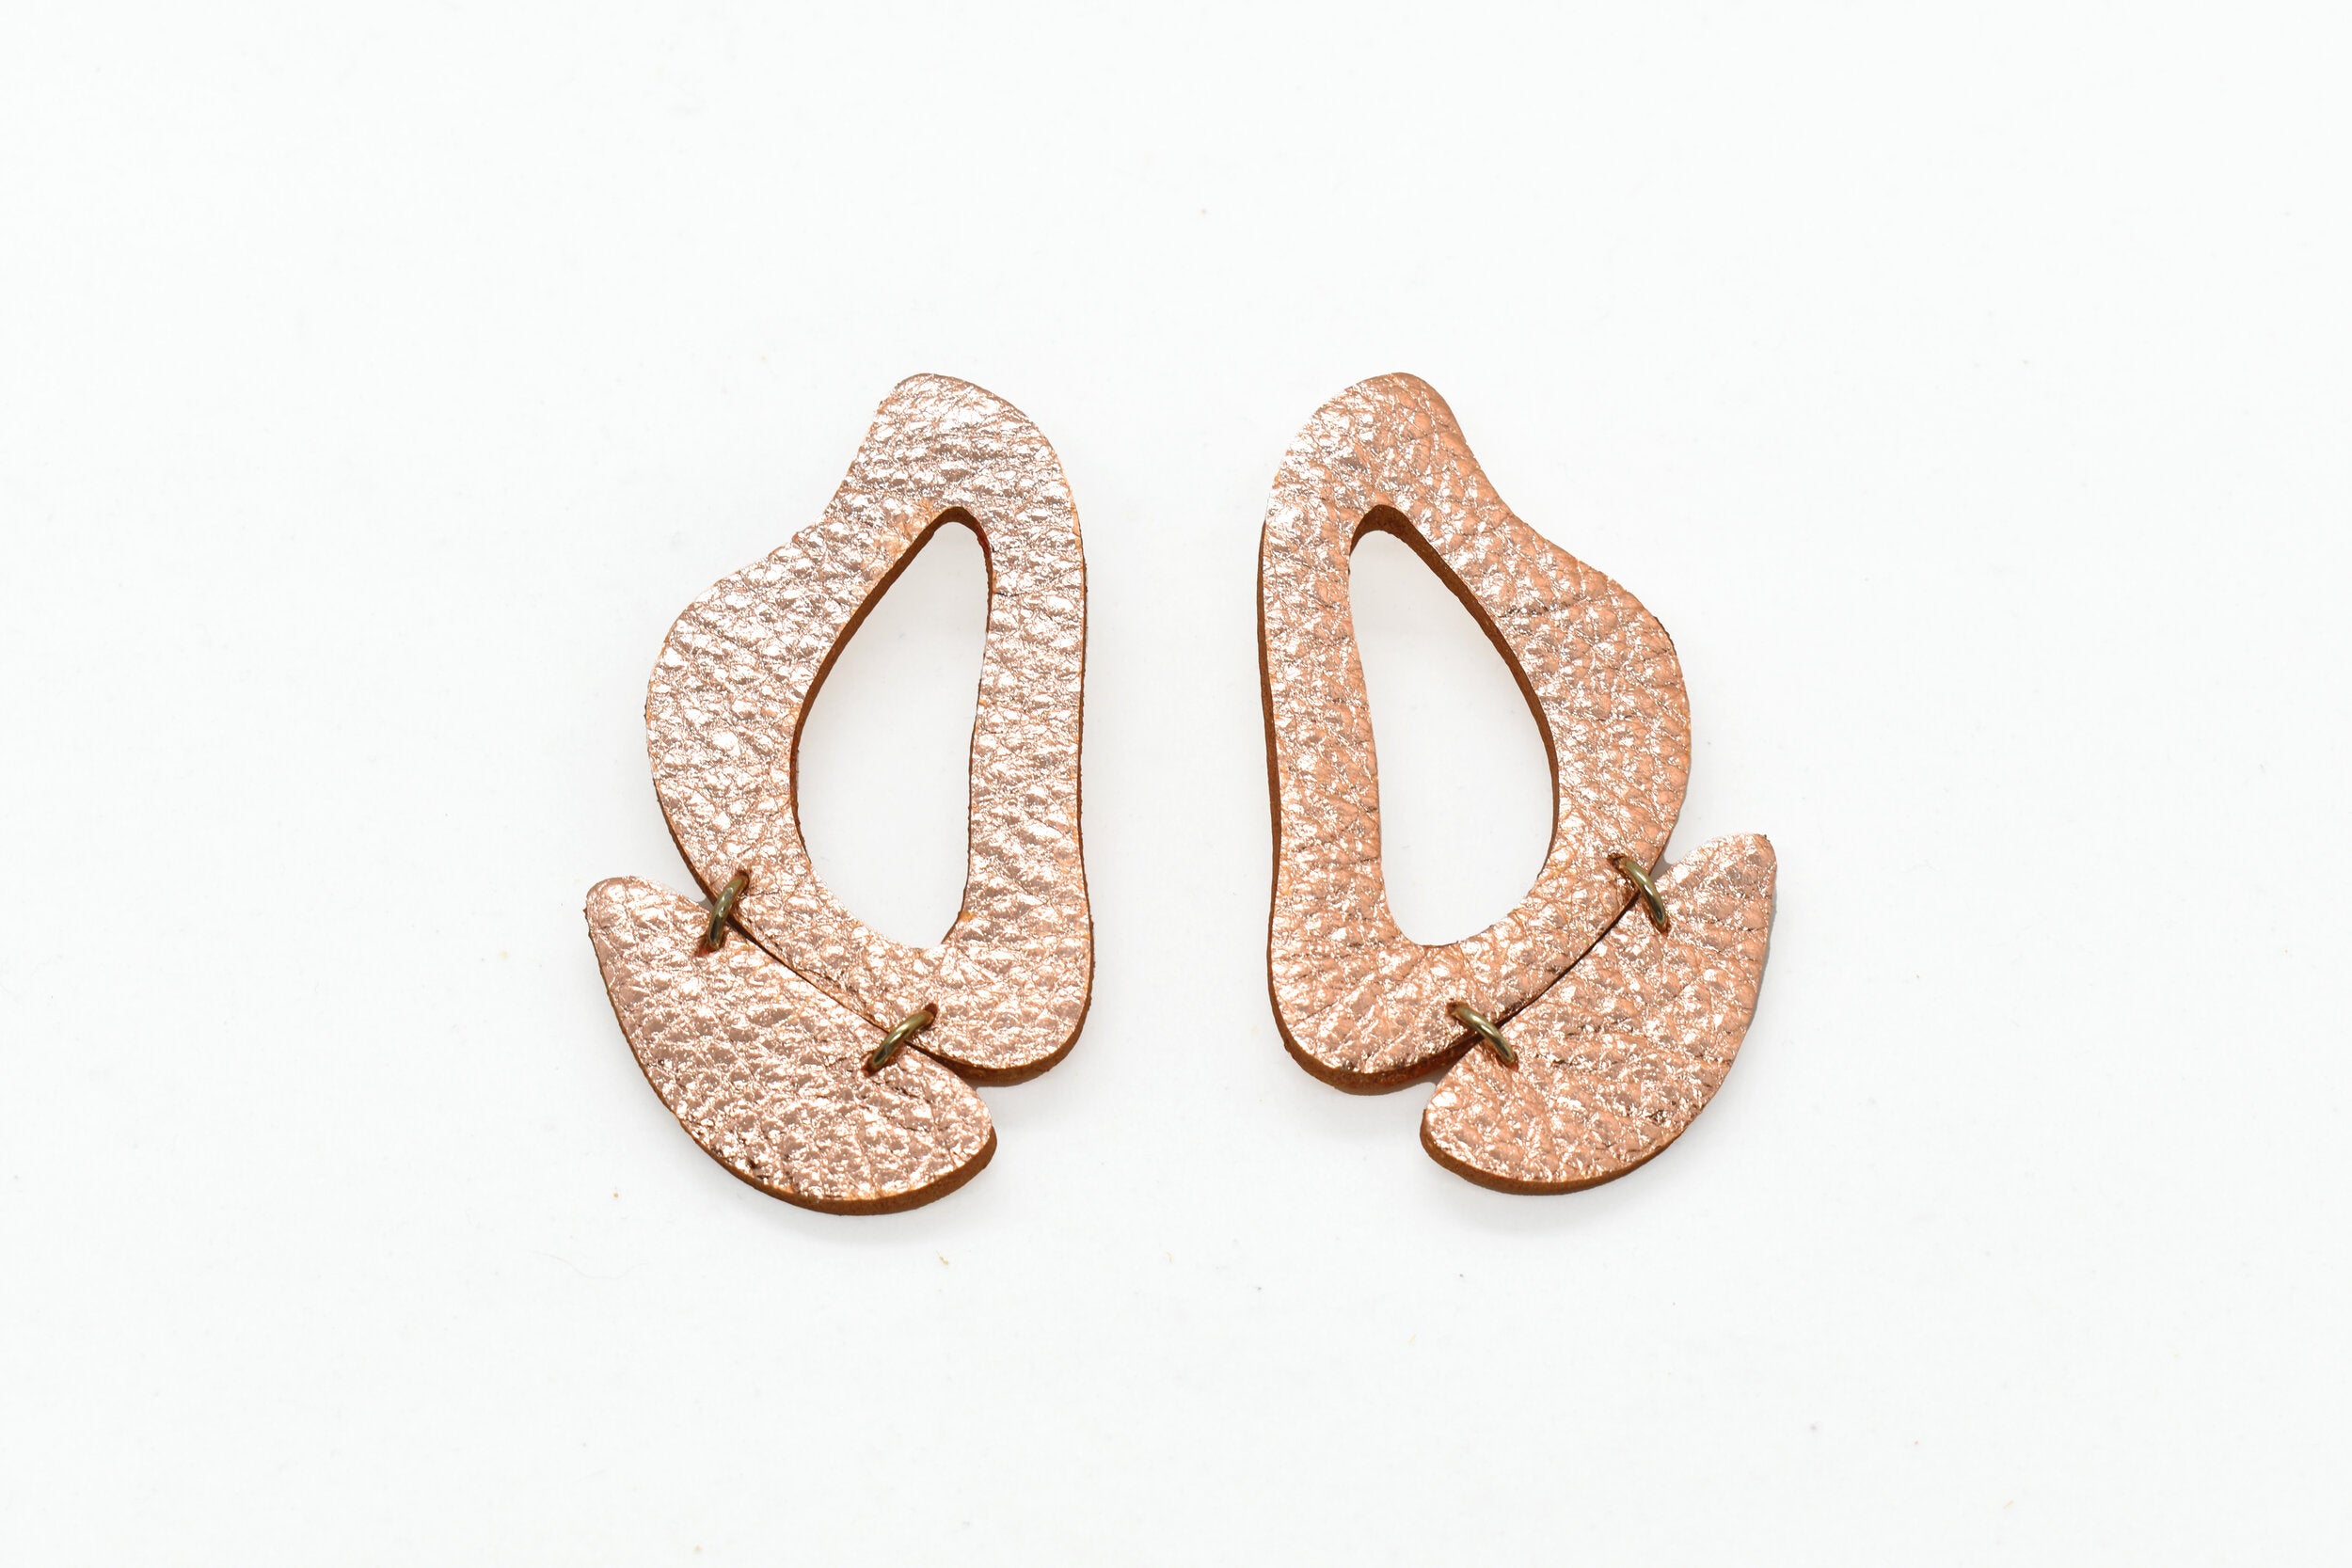 metallic rose gold leather earrings made of cutout organic shapes and anodized aluminum jump rings.